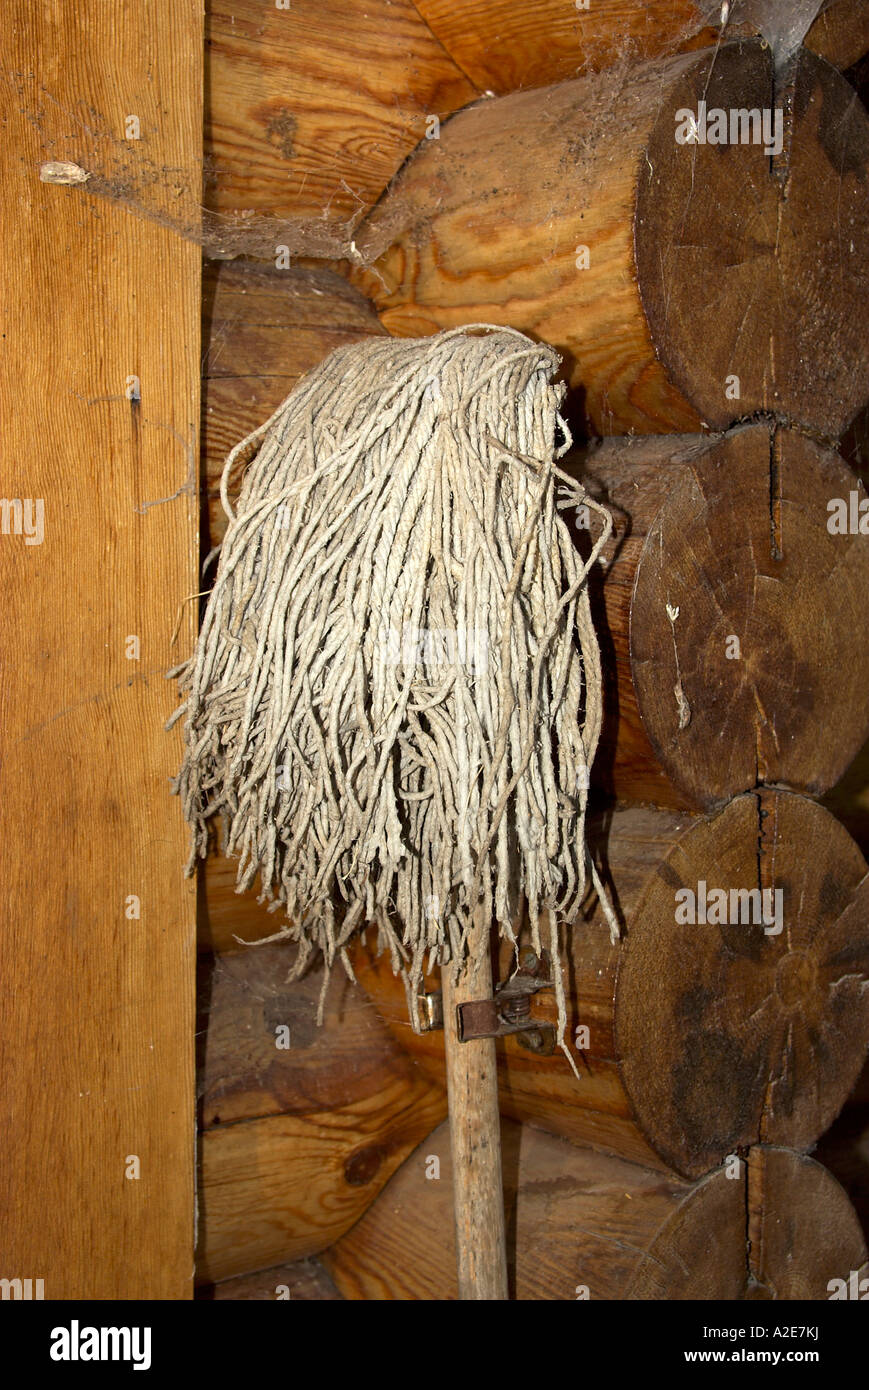 Old mop hanging on a log house Stock Photo - Alamy